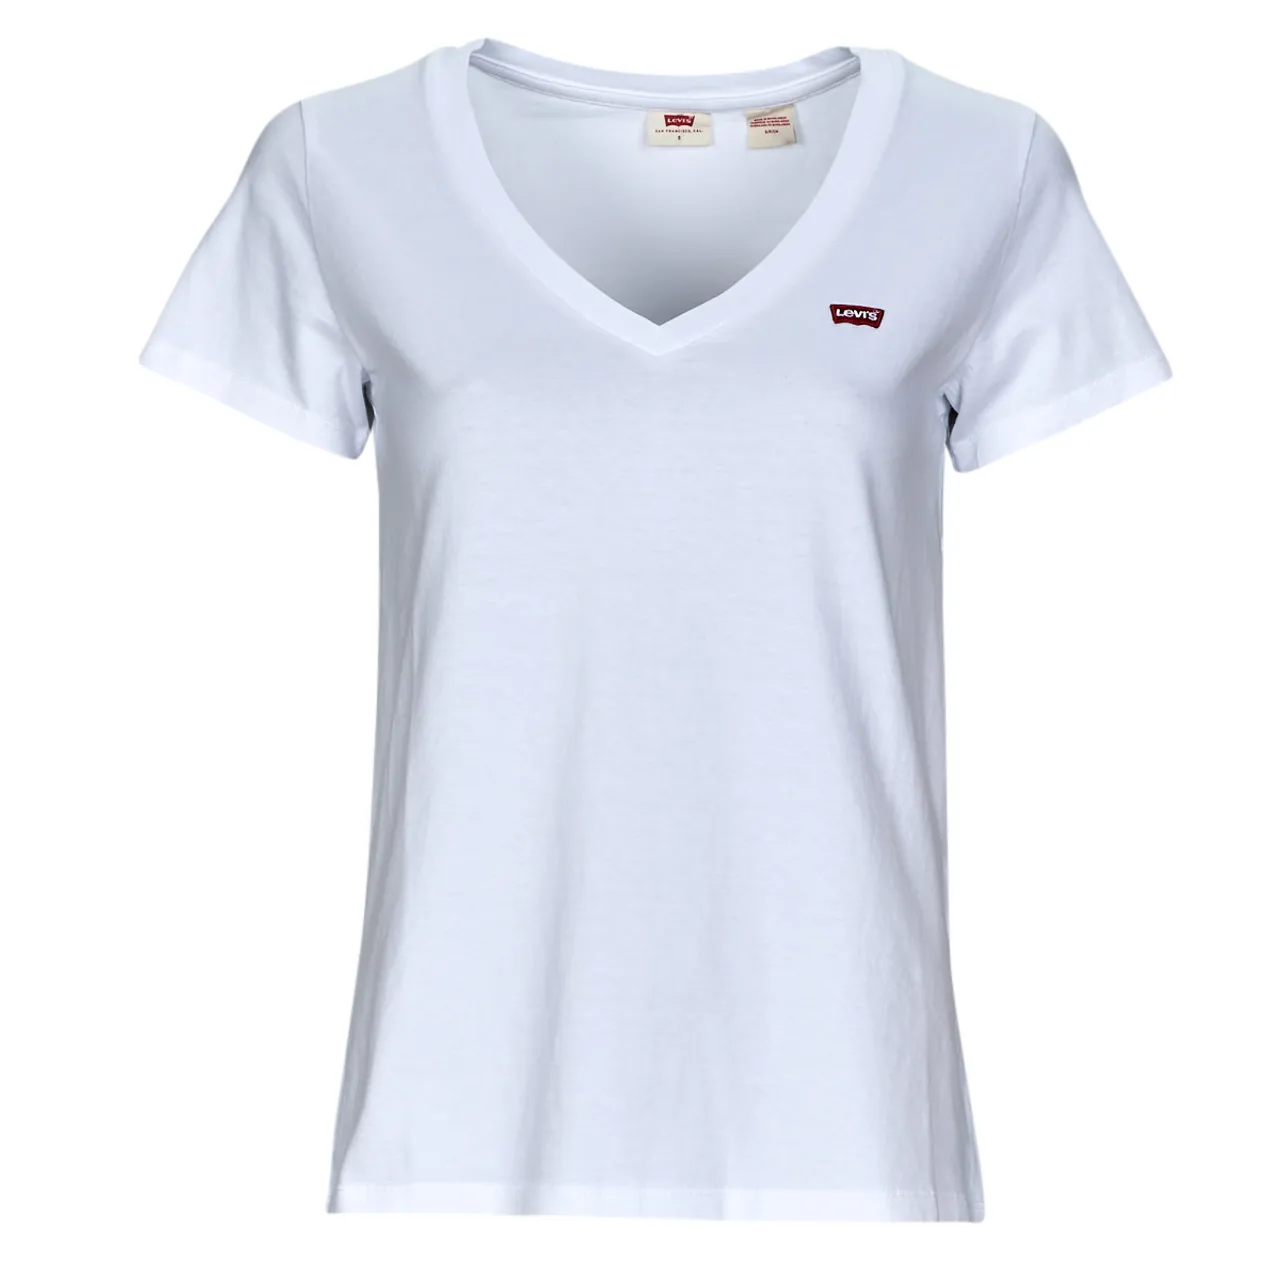 Levis  PERFECT VNECK  women's T shirt in White